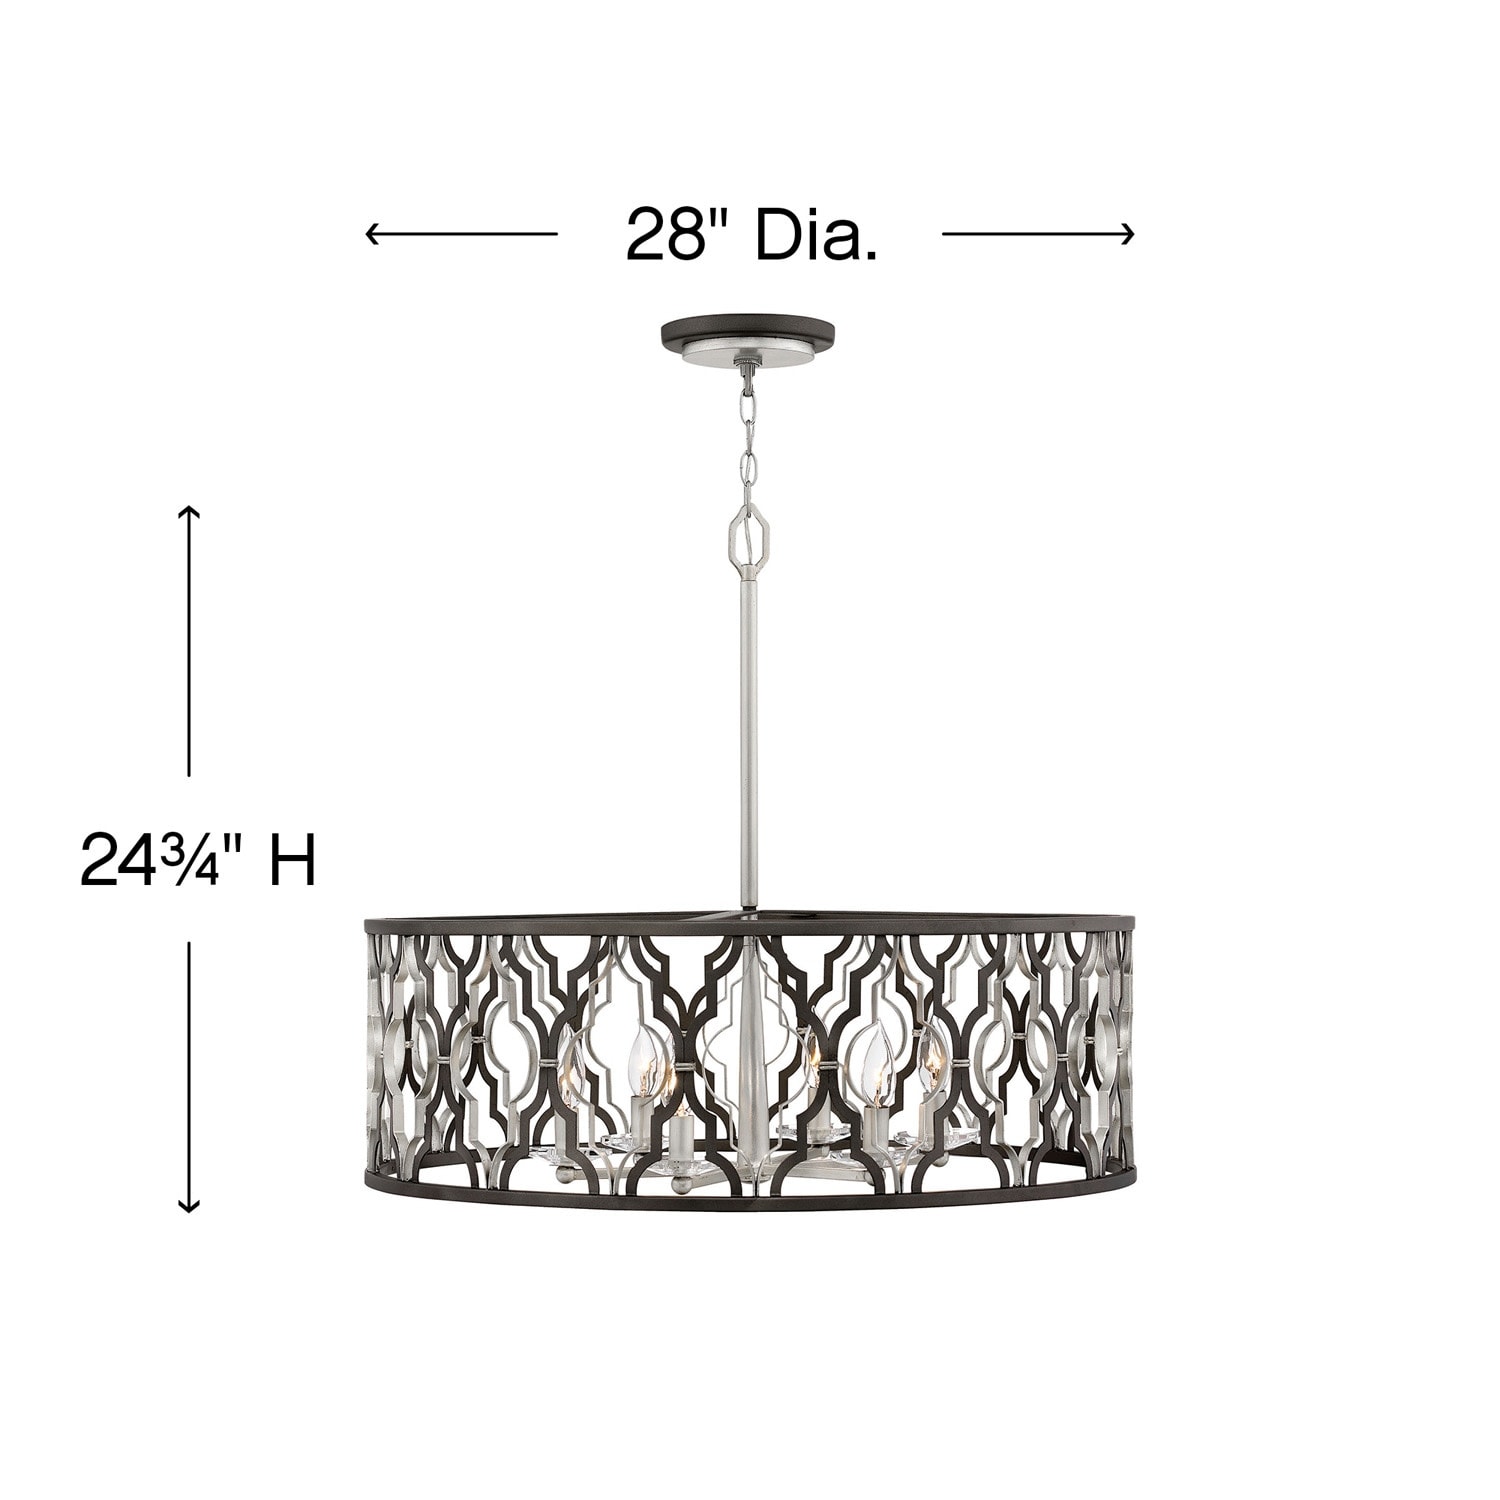 https://ak1.ostkcdn.com/images/products/is/images/direct/21f97817744d30d3036f5b560713e2922ae21de2/Hinkley-Lighting-Portico-6-Light-28%22-Wide-Drum-Chandelier.jpg